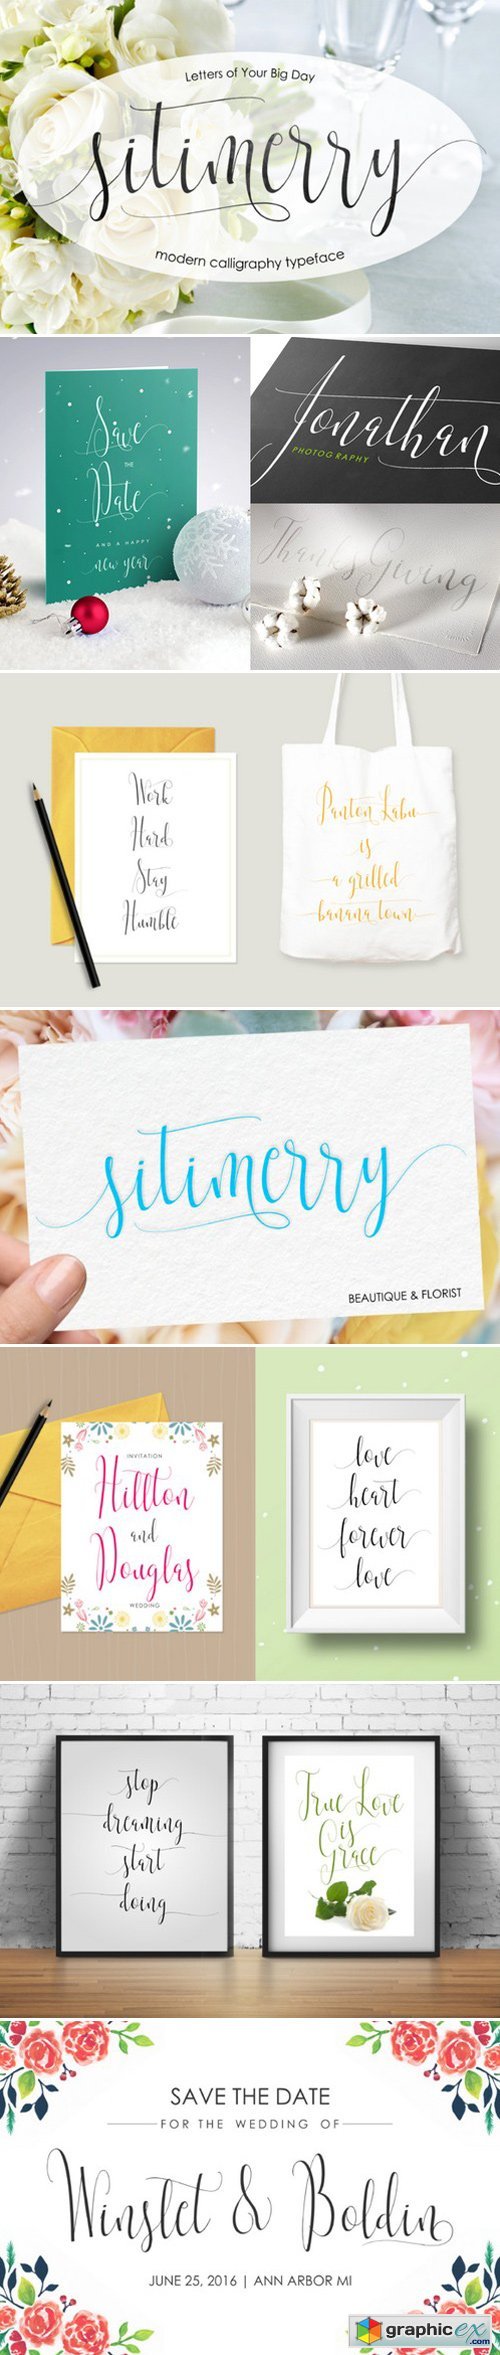 Sitimerry Script for Your Big Day